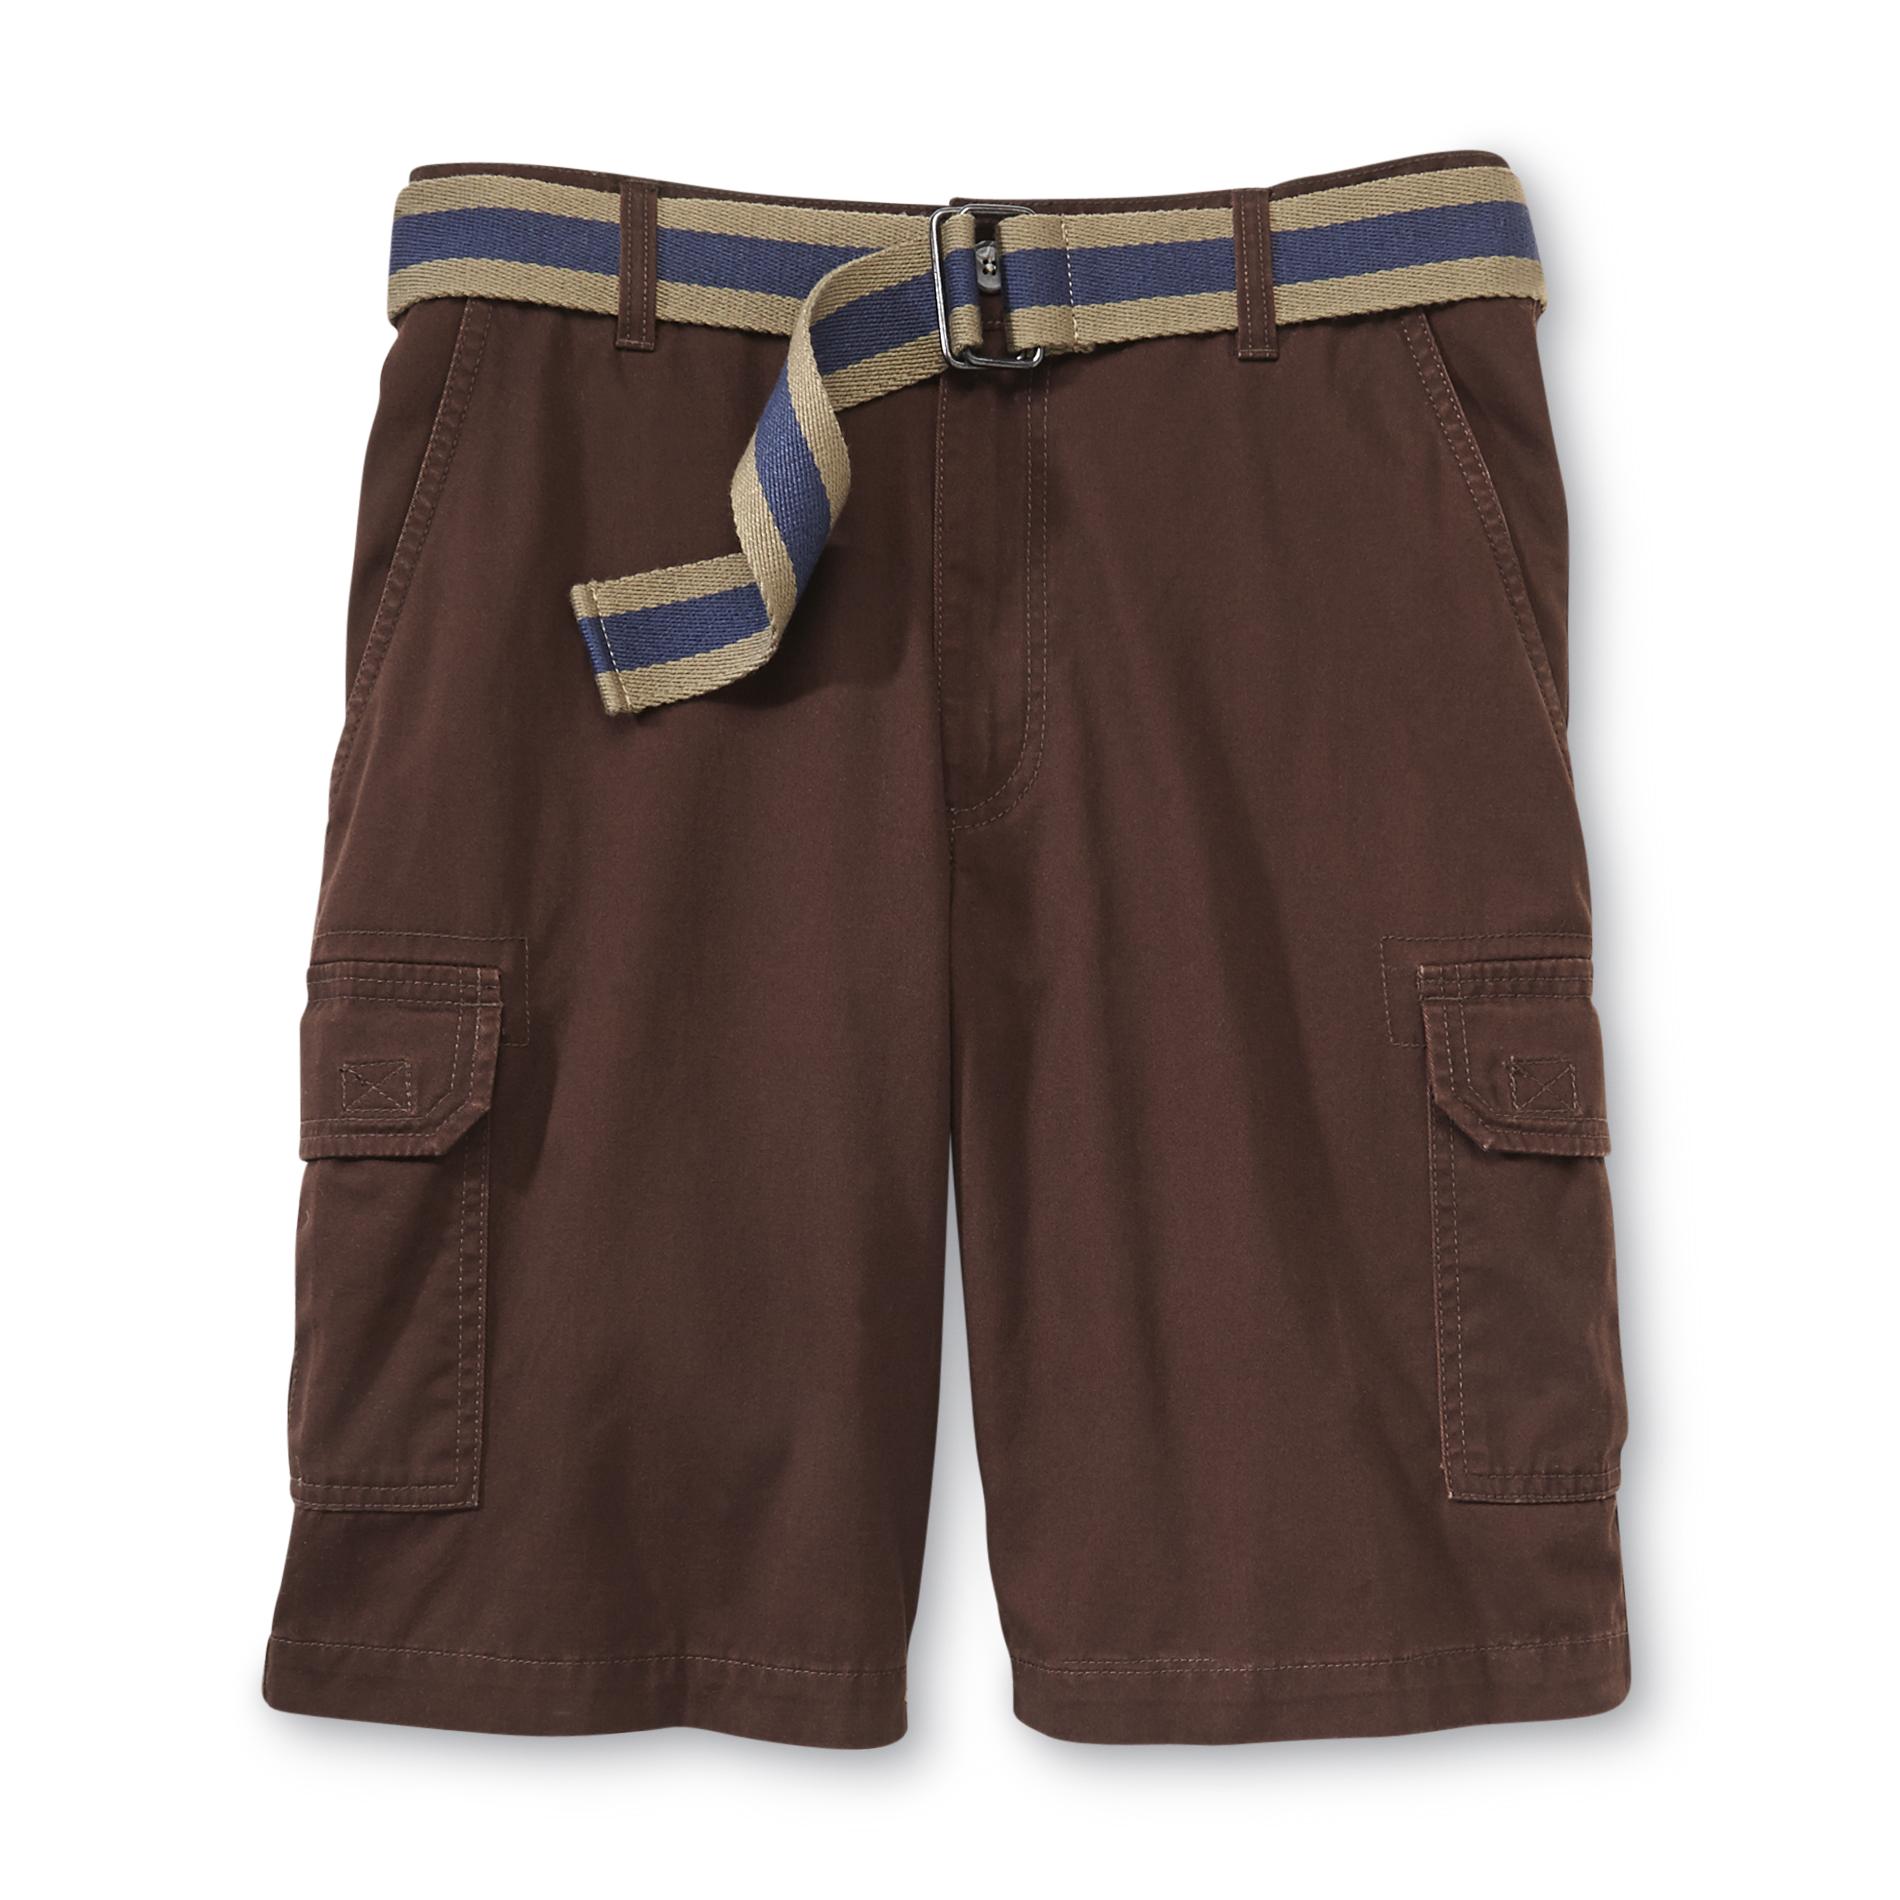 Basic Editions Men's Belted Cargo Shorts